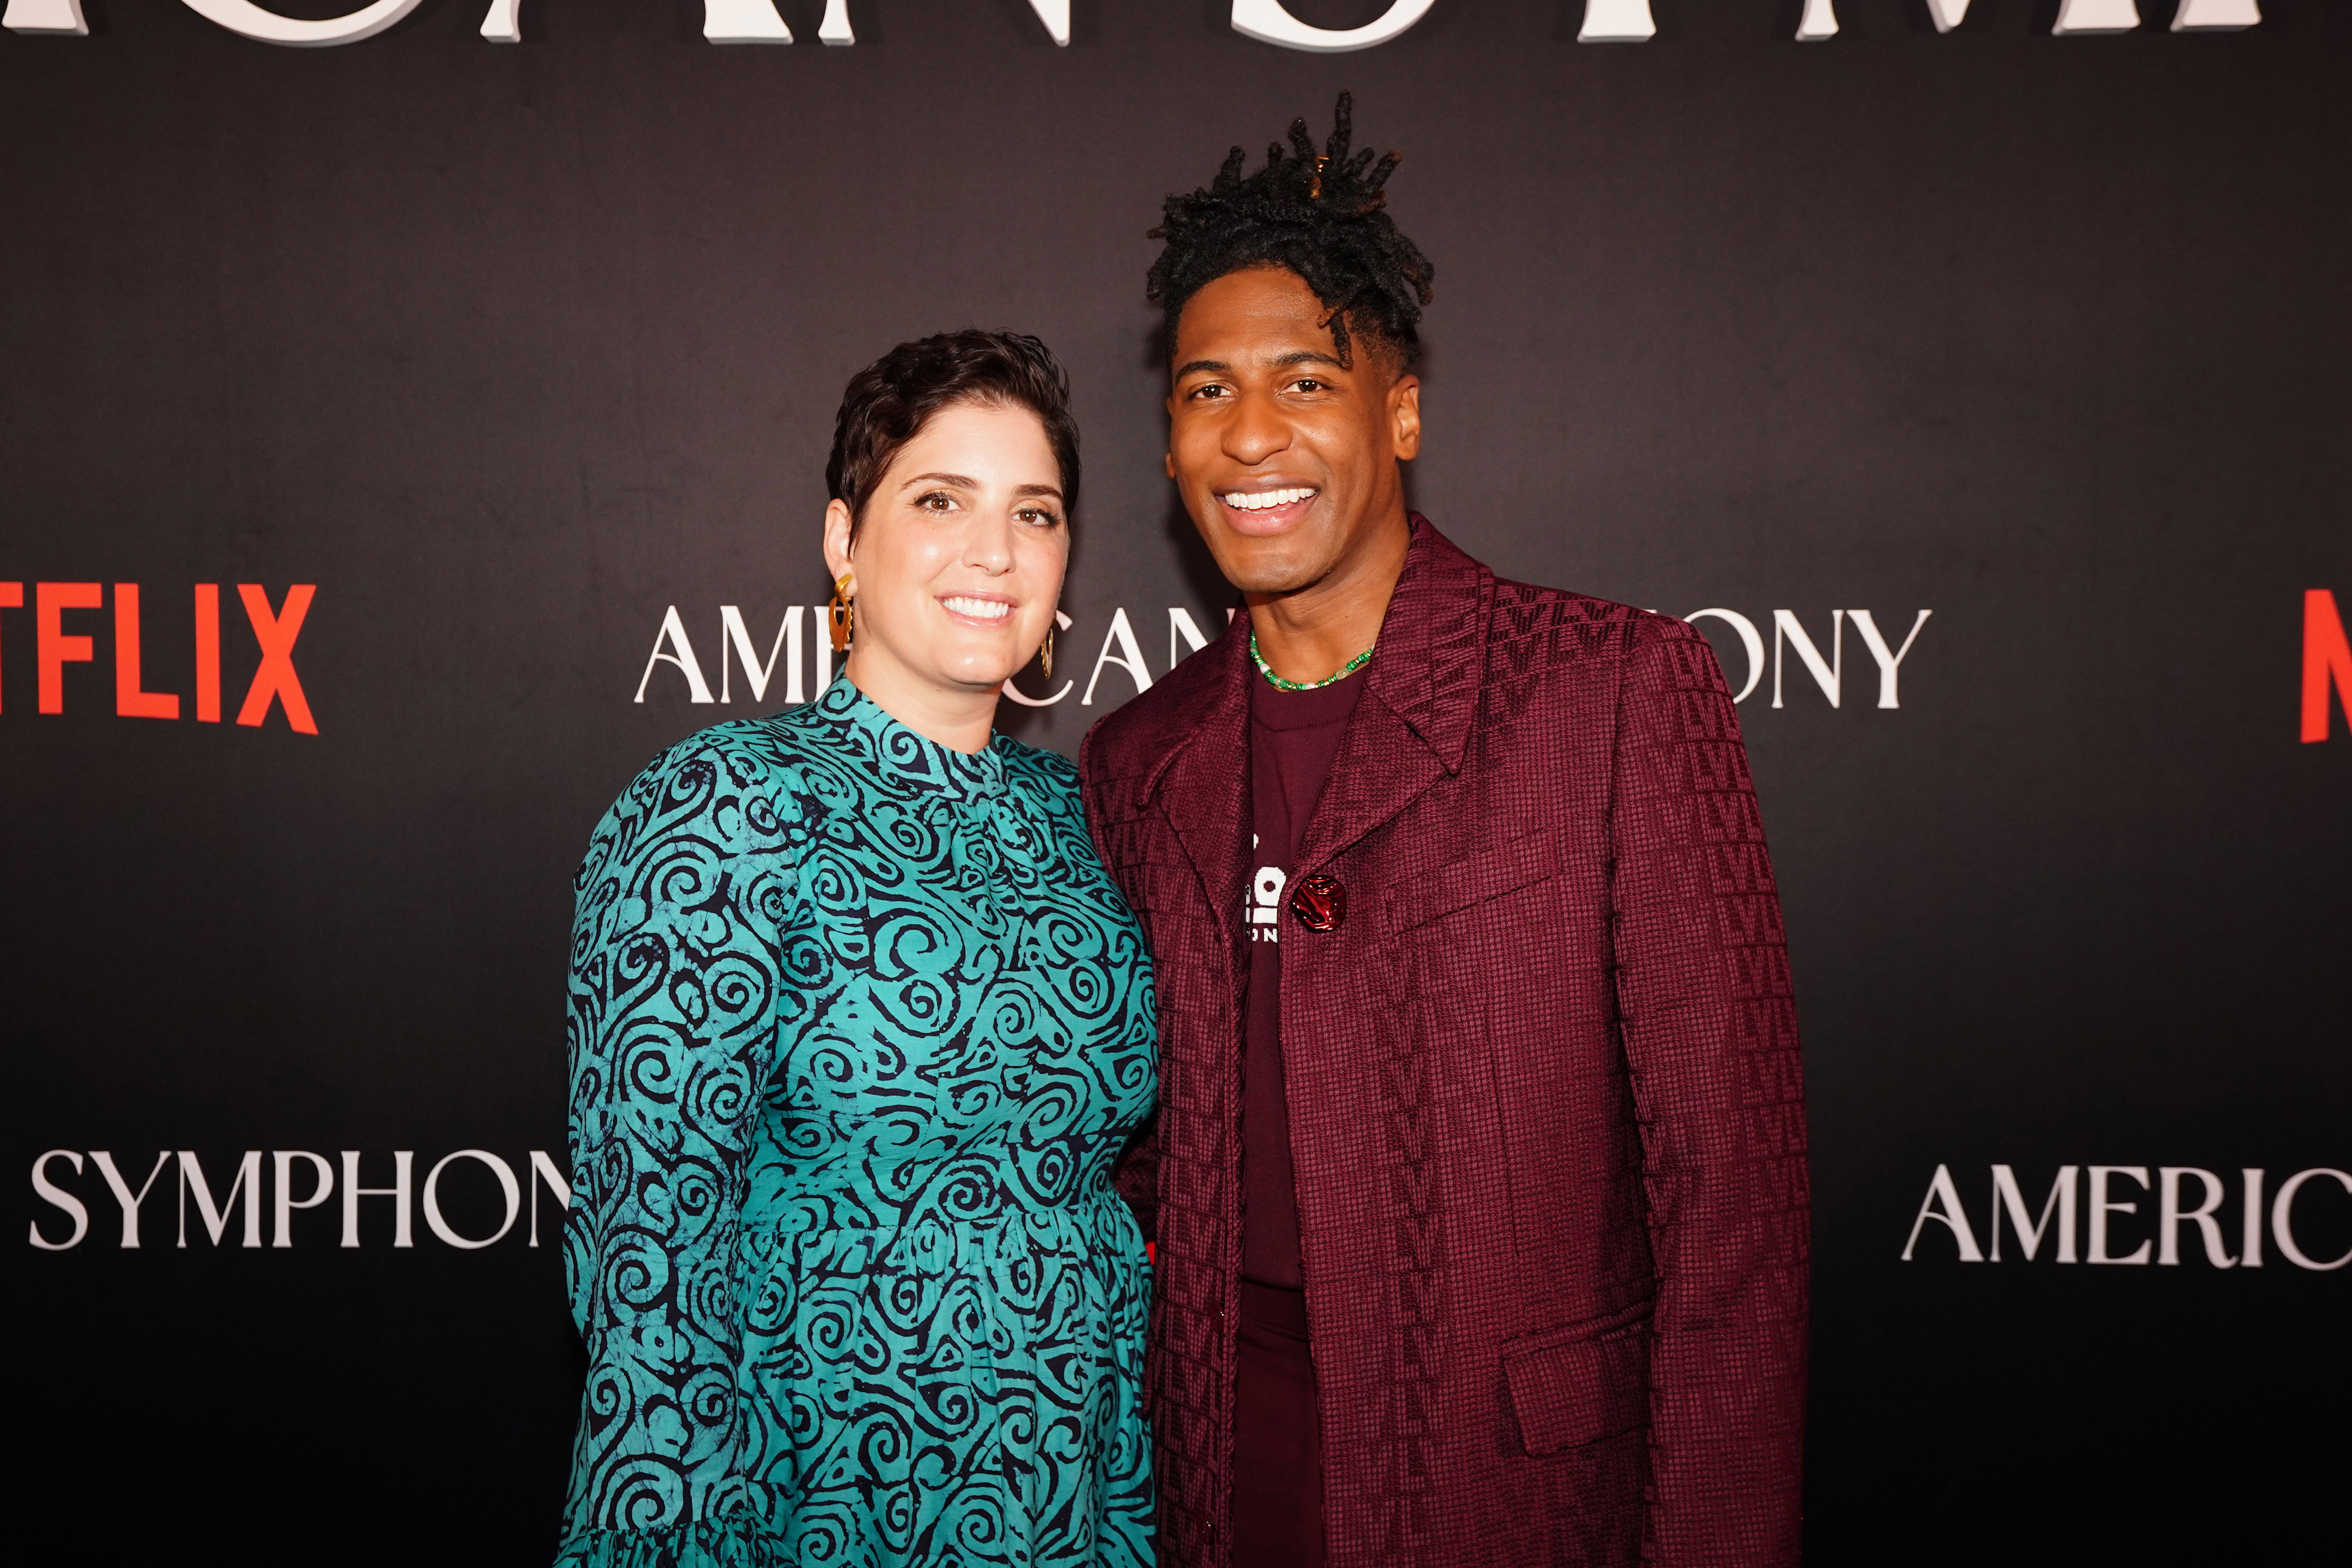 ‘american symphony' subjects jon batiste and ​​suleika jaouad on showing survival as a ‘creative act'